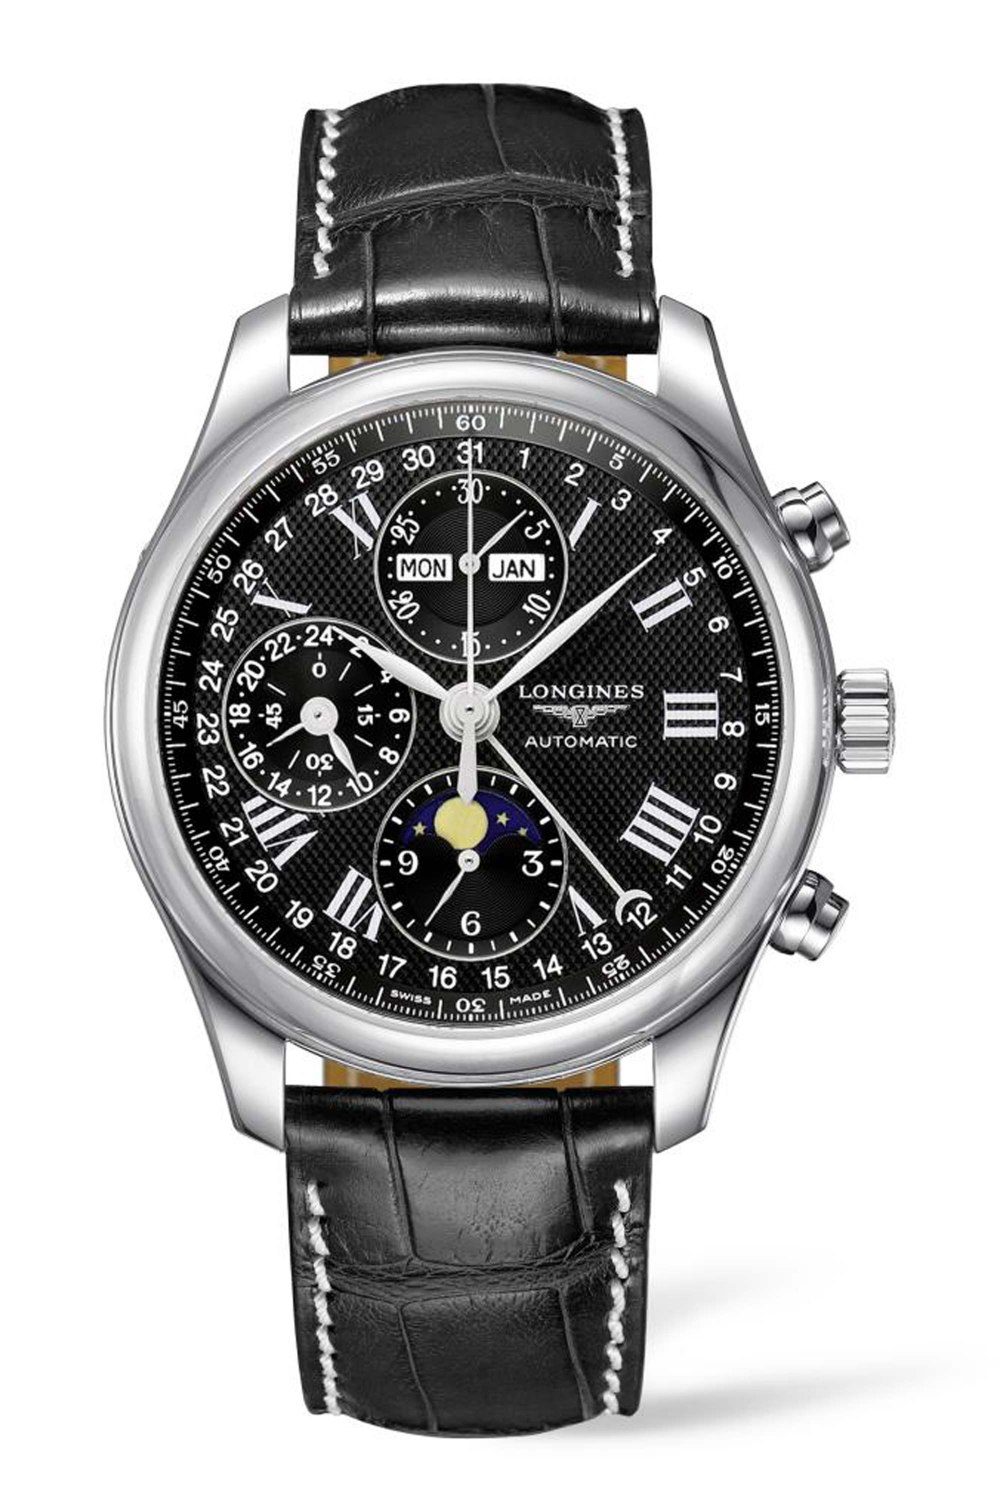 LONGINES The Longines Master Collection L2.773.4.51.7